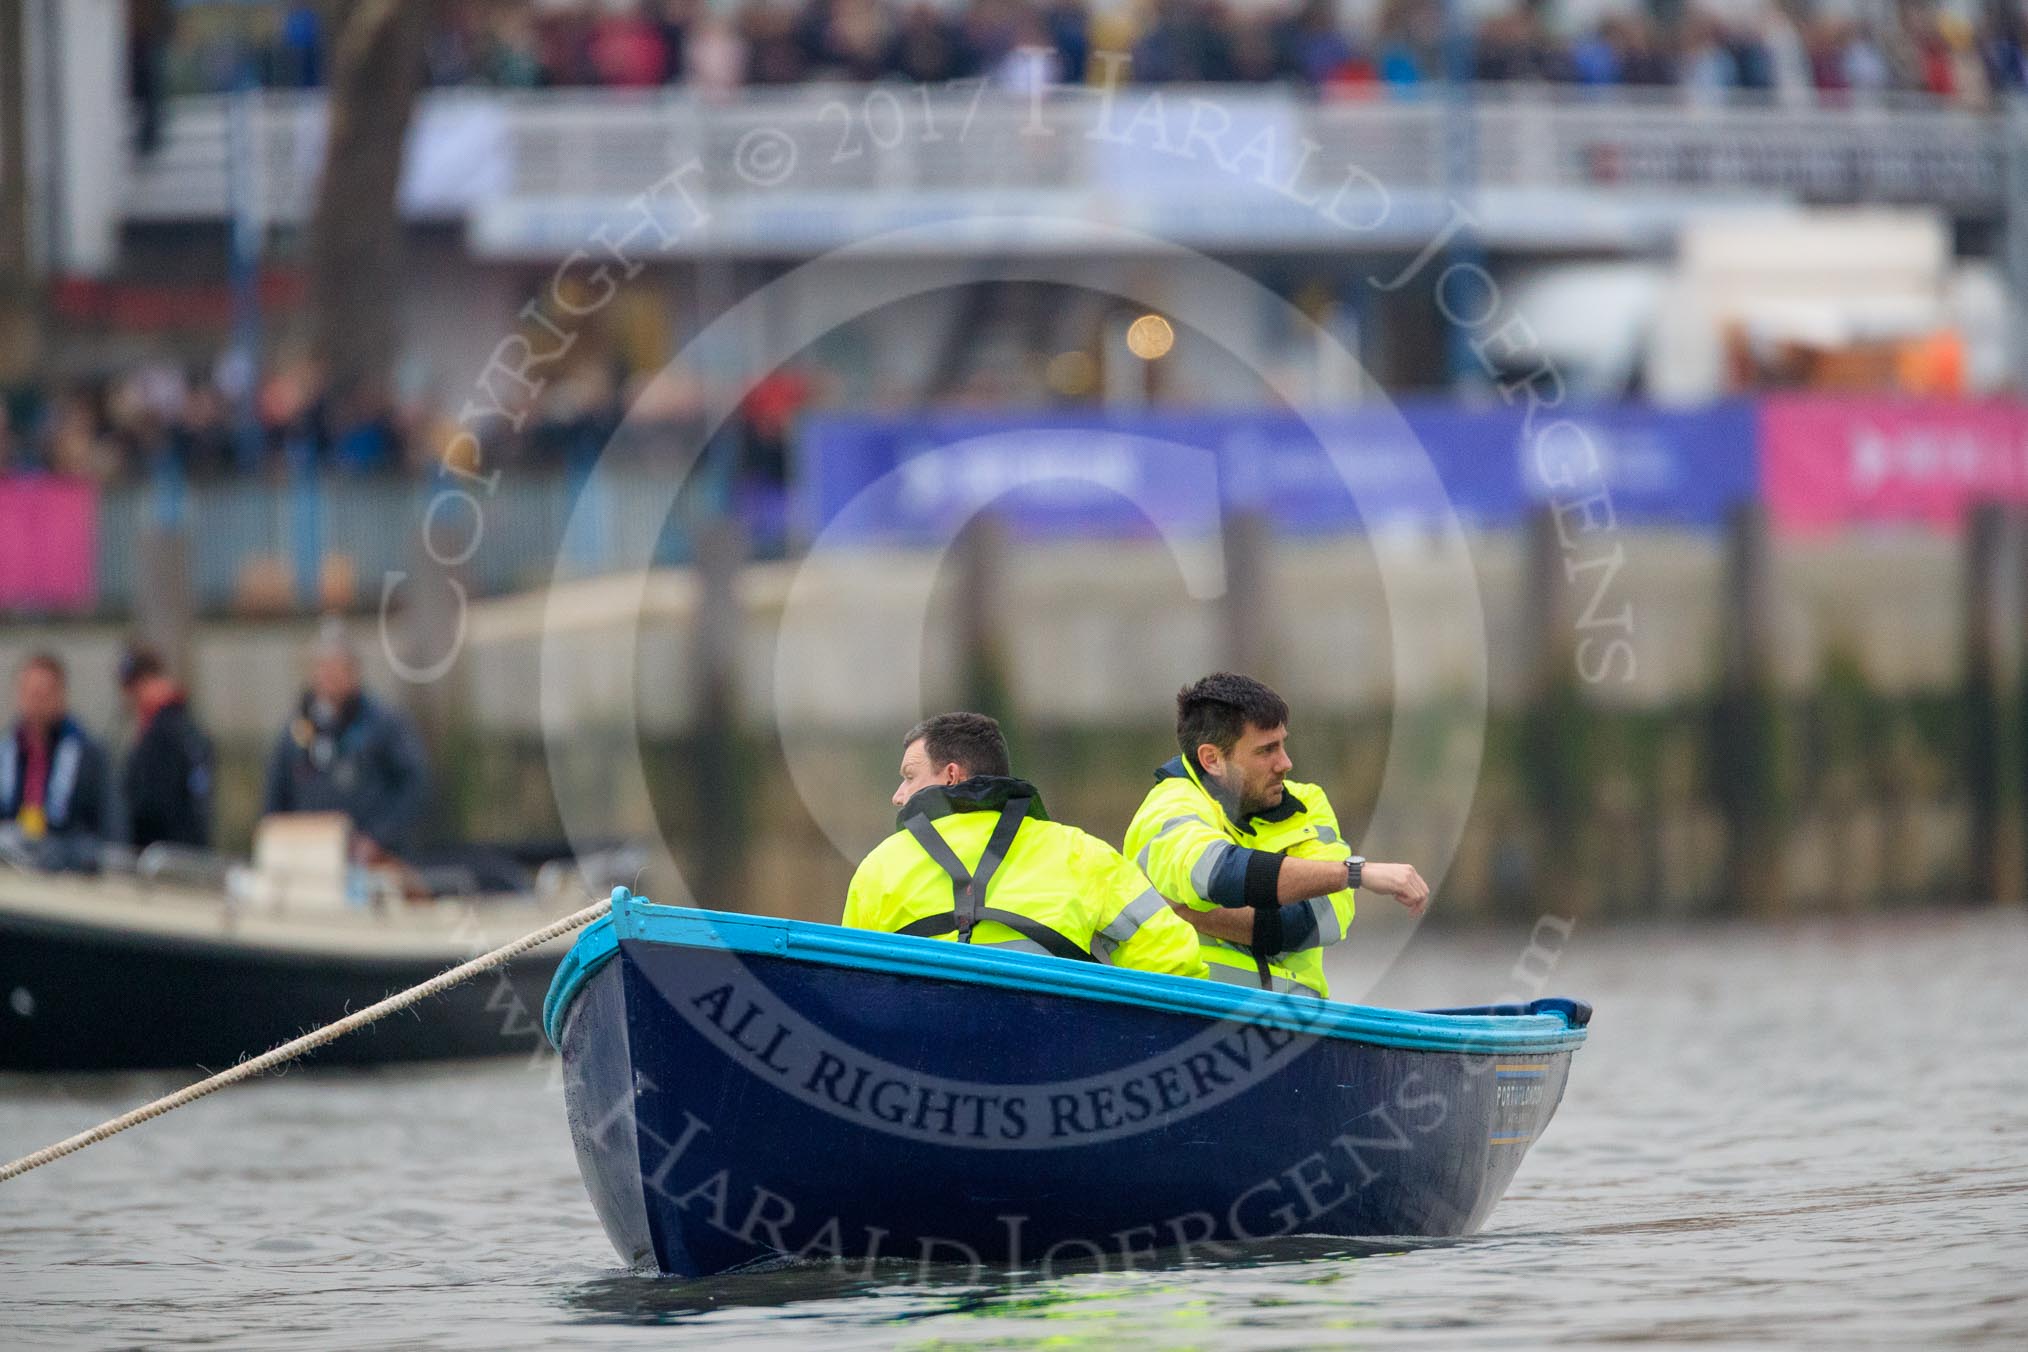 The Cancer Research UK Women's Boat Race 2018: One of the two stake boats at the start line near Putney Bridge.
River Thames between Putney Bridge and Mortlake,
London SW15,

United Kingdom,
on 24 March 2018 at 16:23, image #152